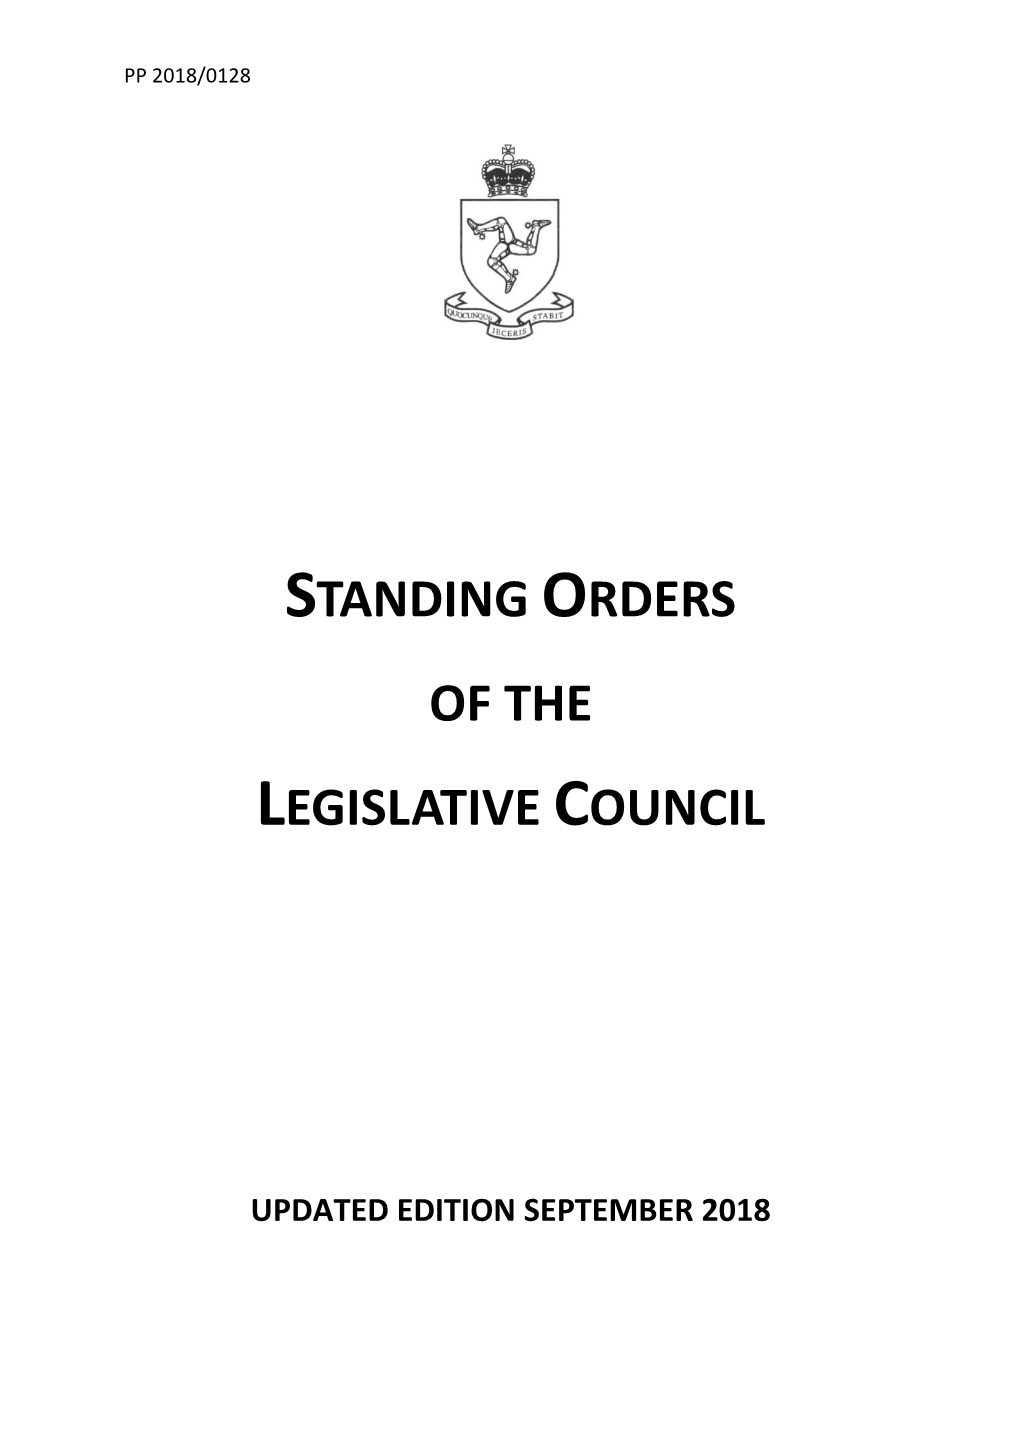 Standing Orders of the Legislative Council